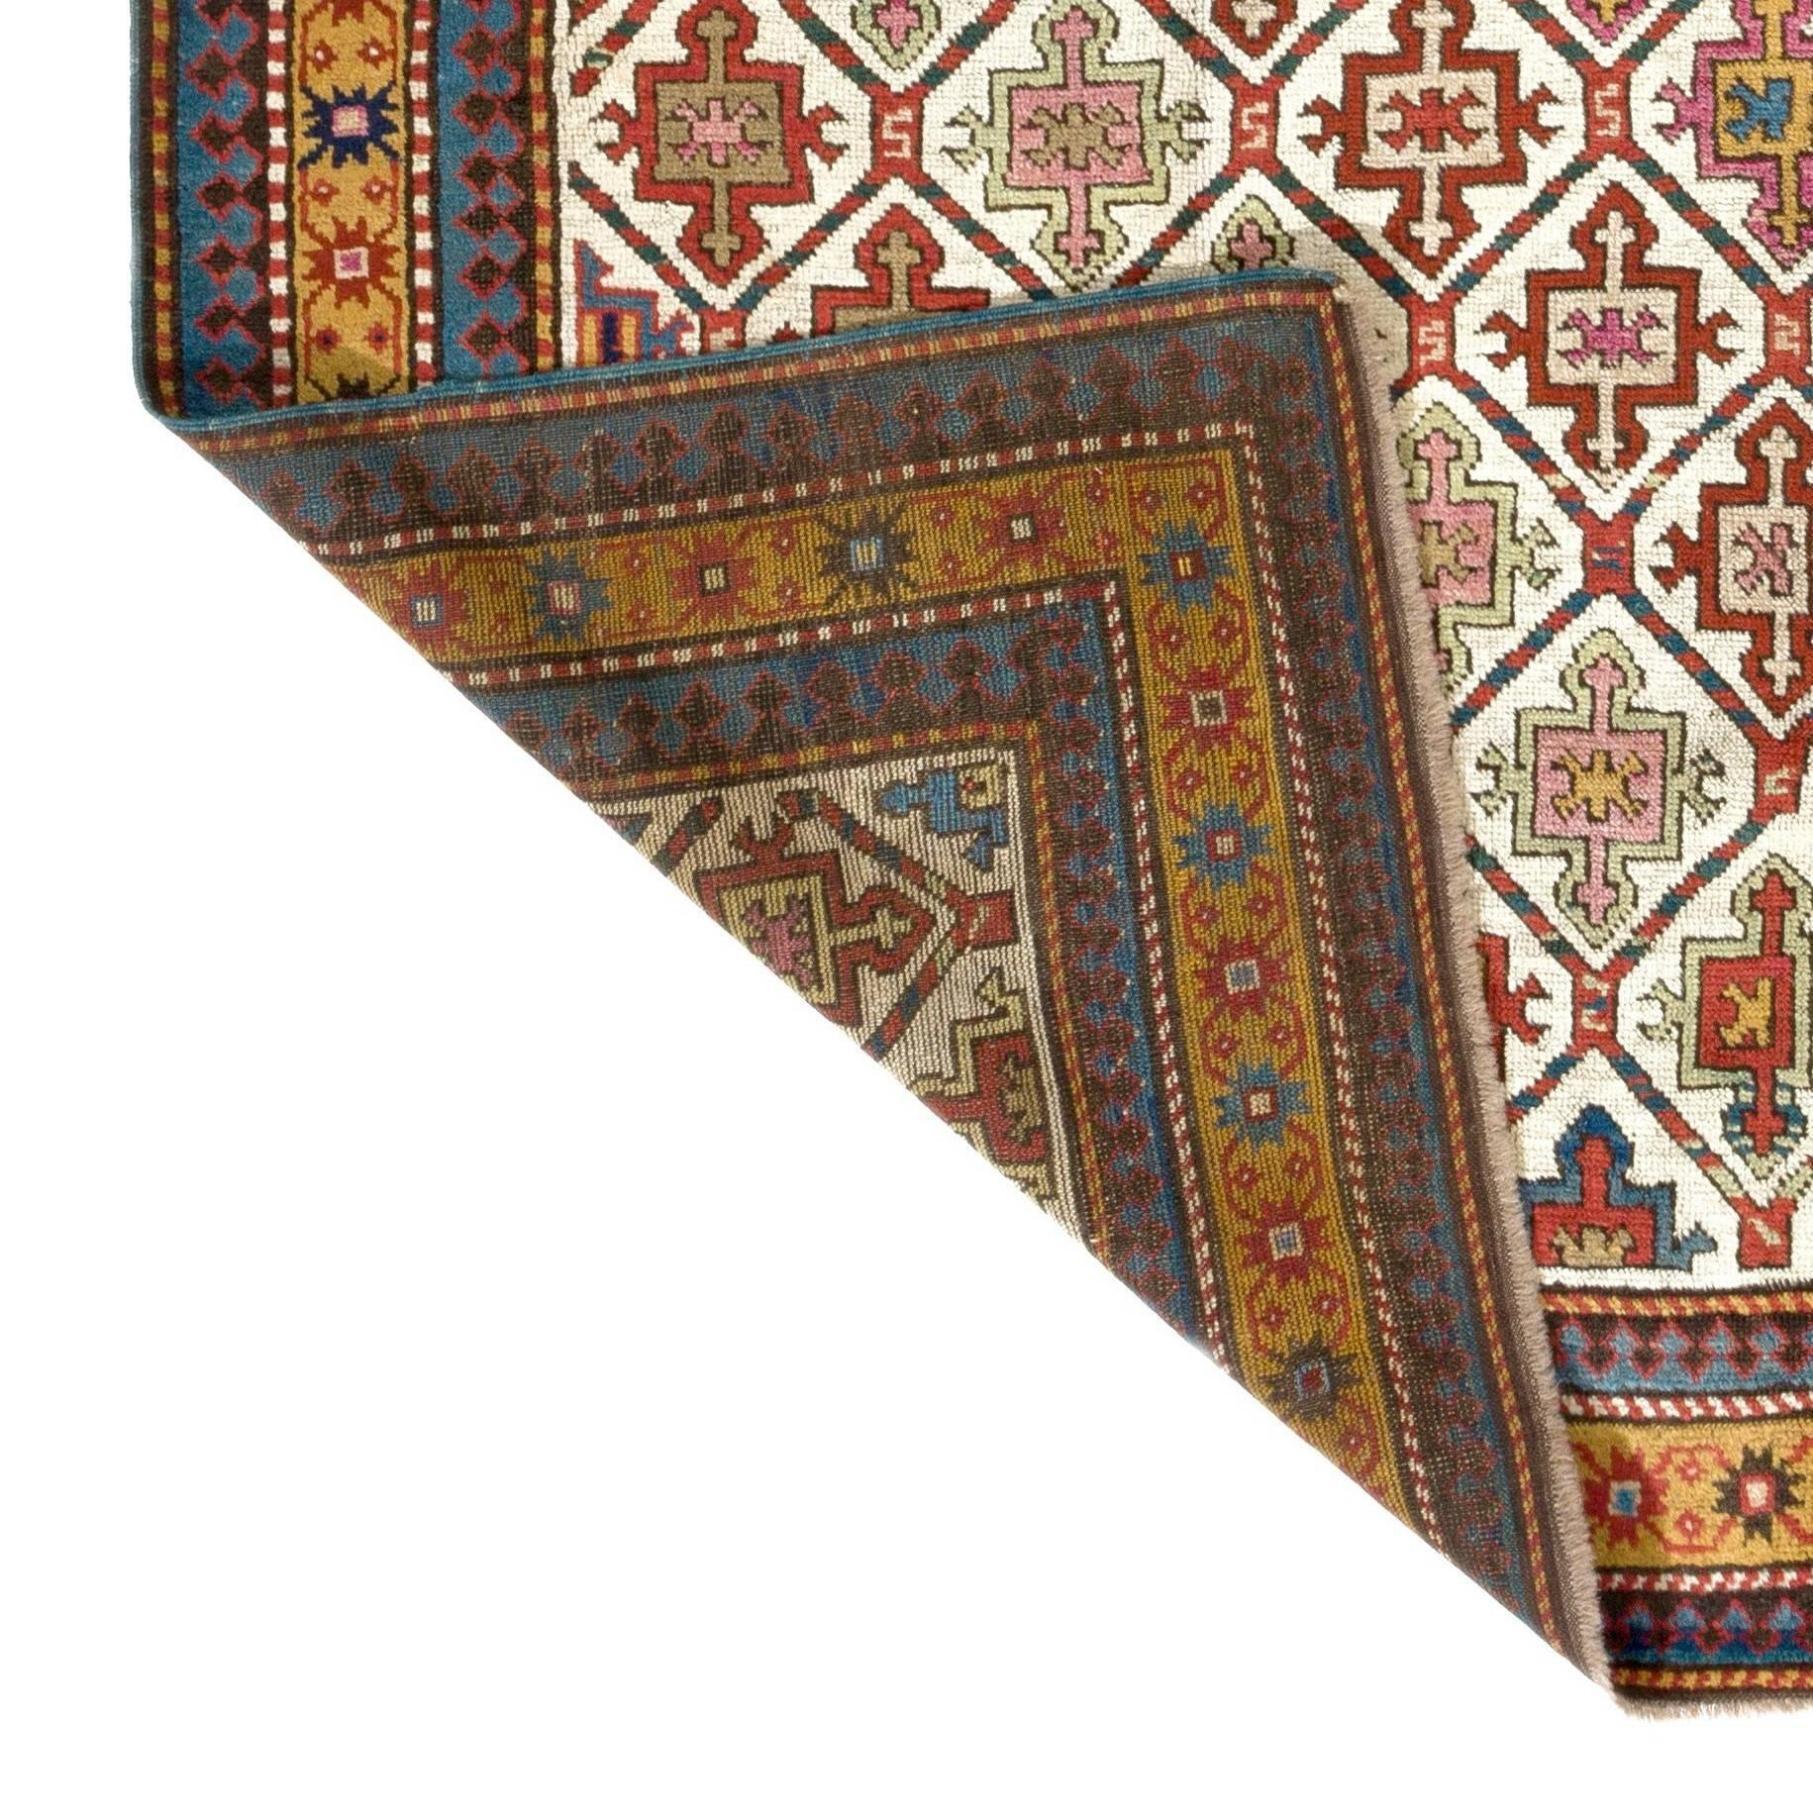 3.6x8.4 ft Rare Antique Caucasian Kazak Rug from Karabagh, Dated, 1812 In Good Condition For Sale In Philadelphia, PA